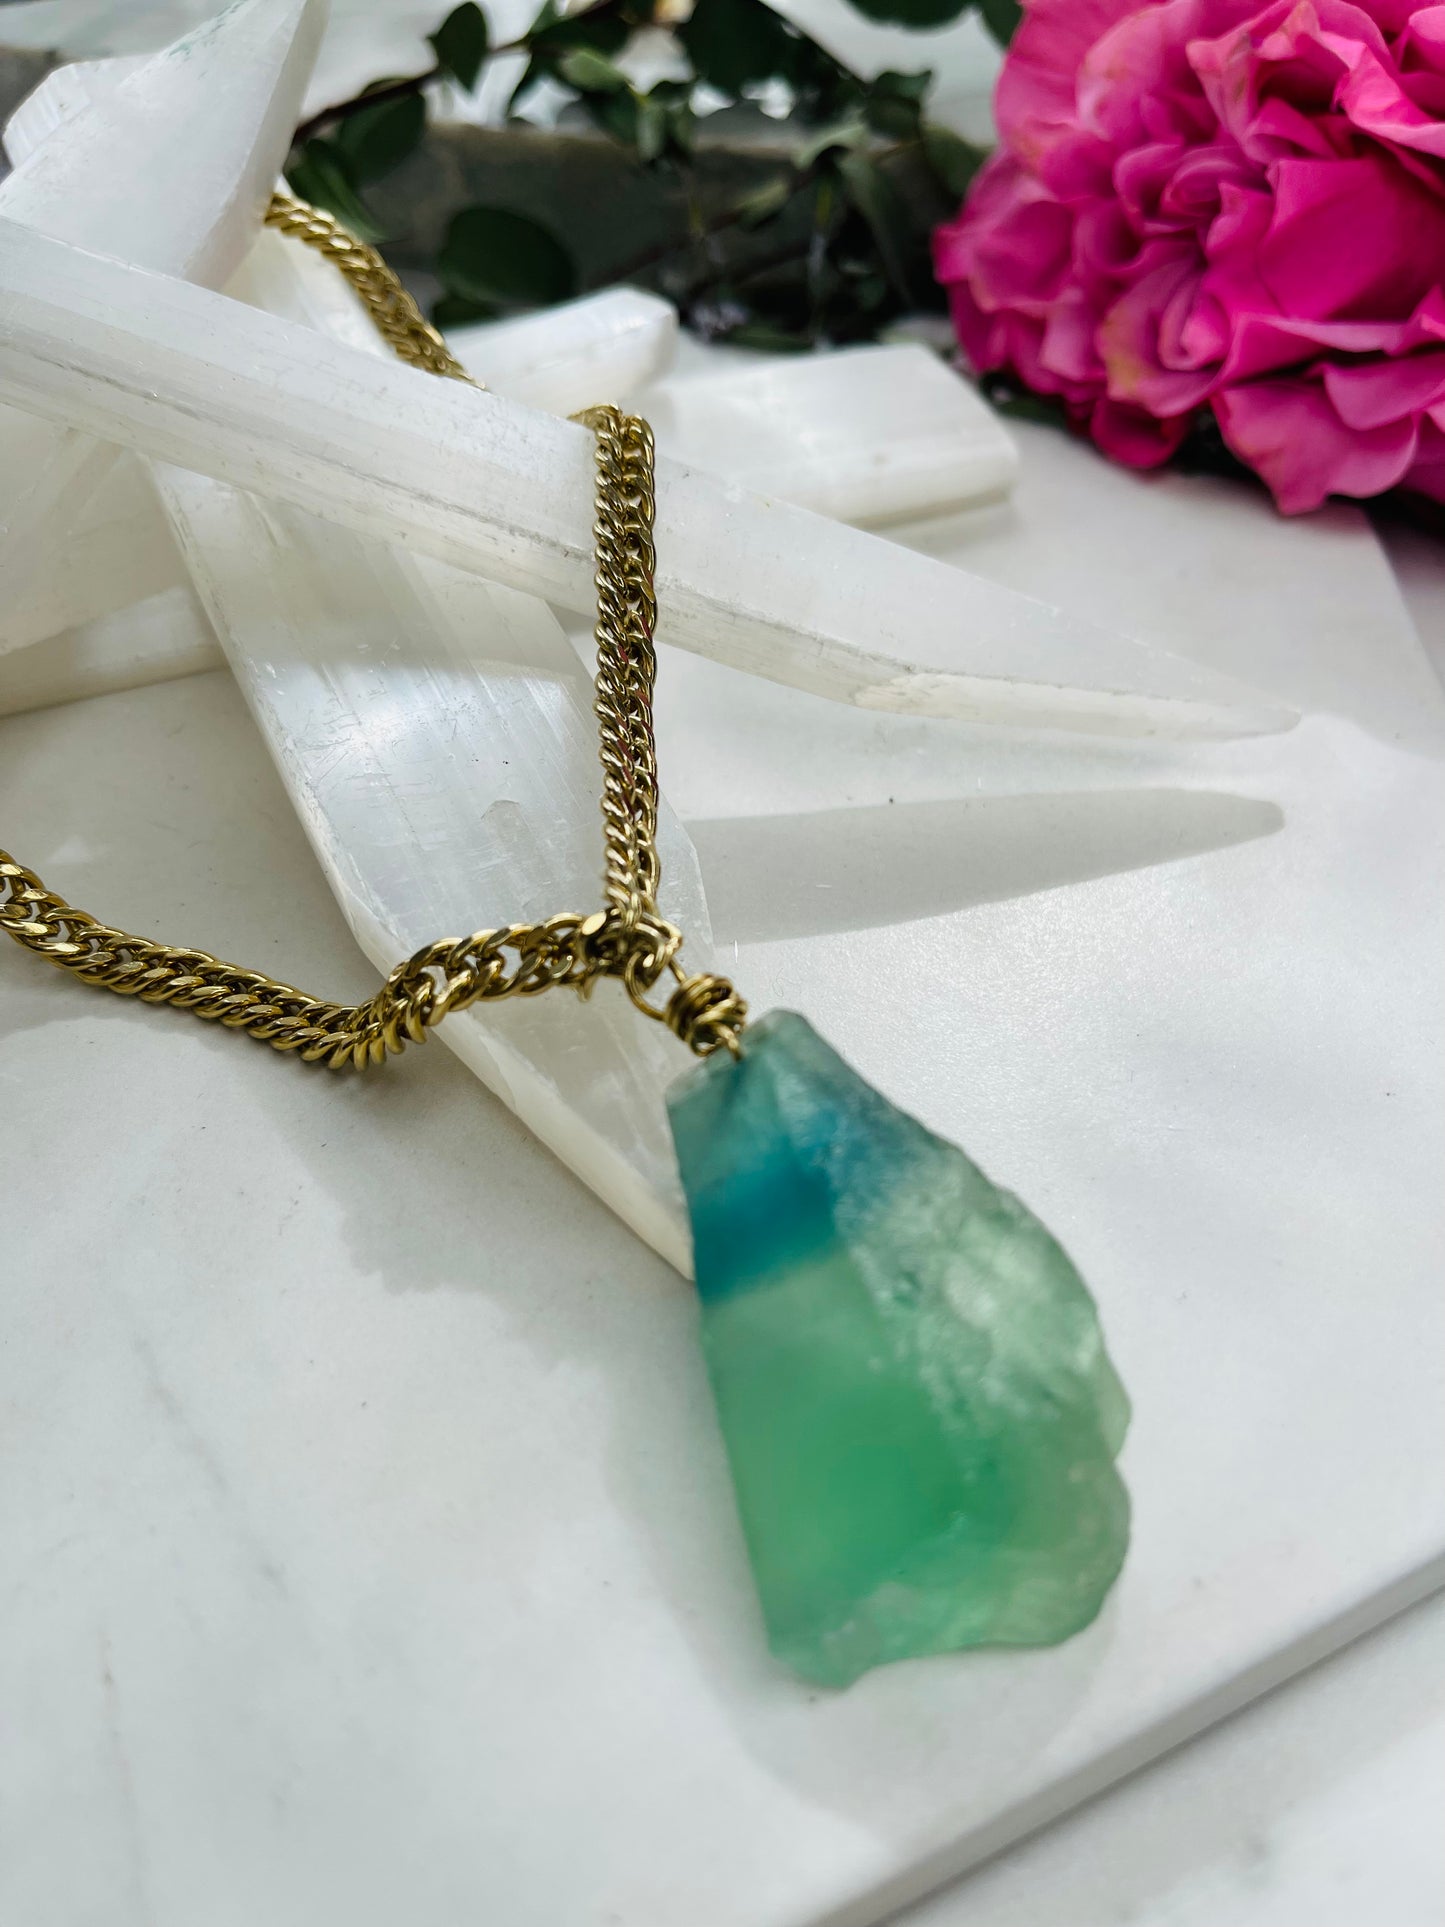 Chunky Raw Rainbow Fluorite Crystal Nugget - Vintage Gold Soul Chain Necklace